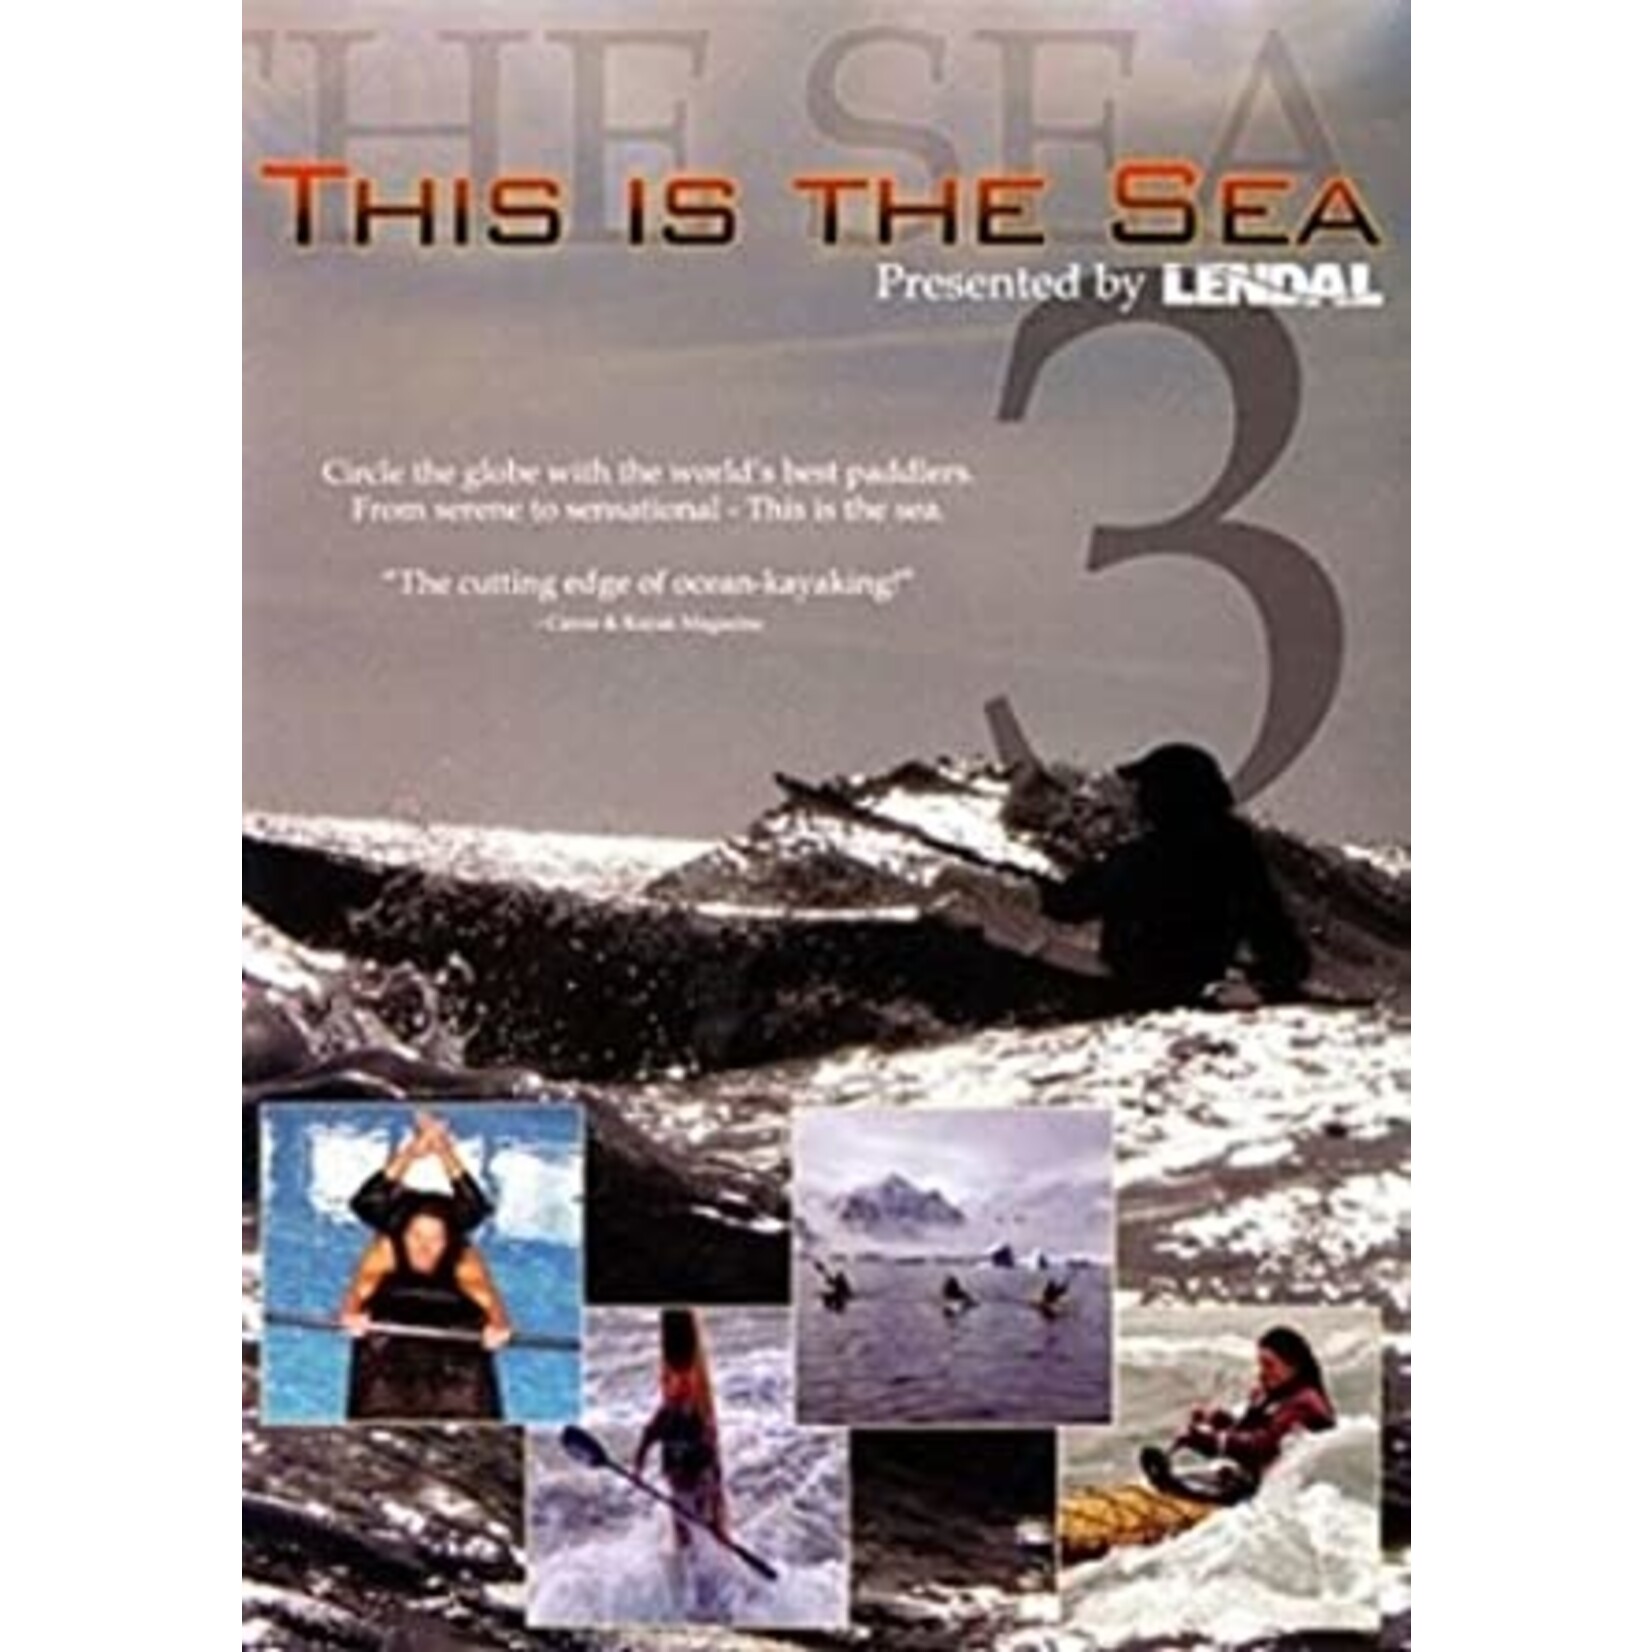 Cackle - This is the Sea 3-DVD